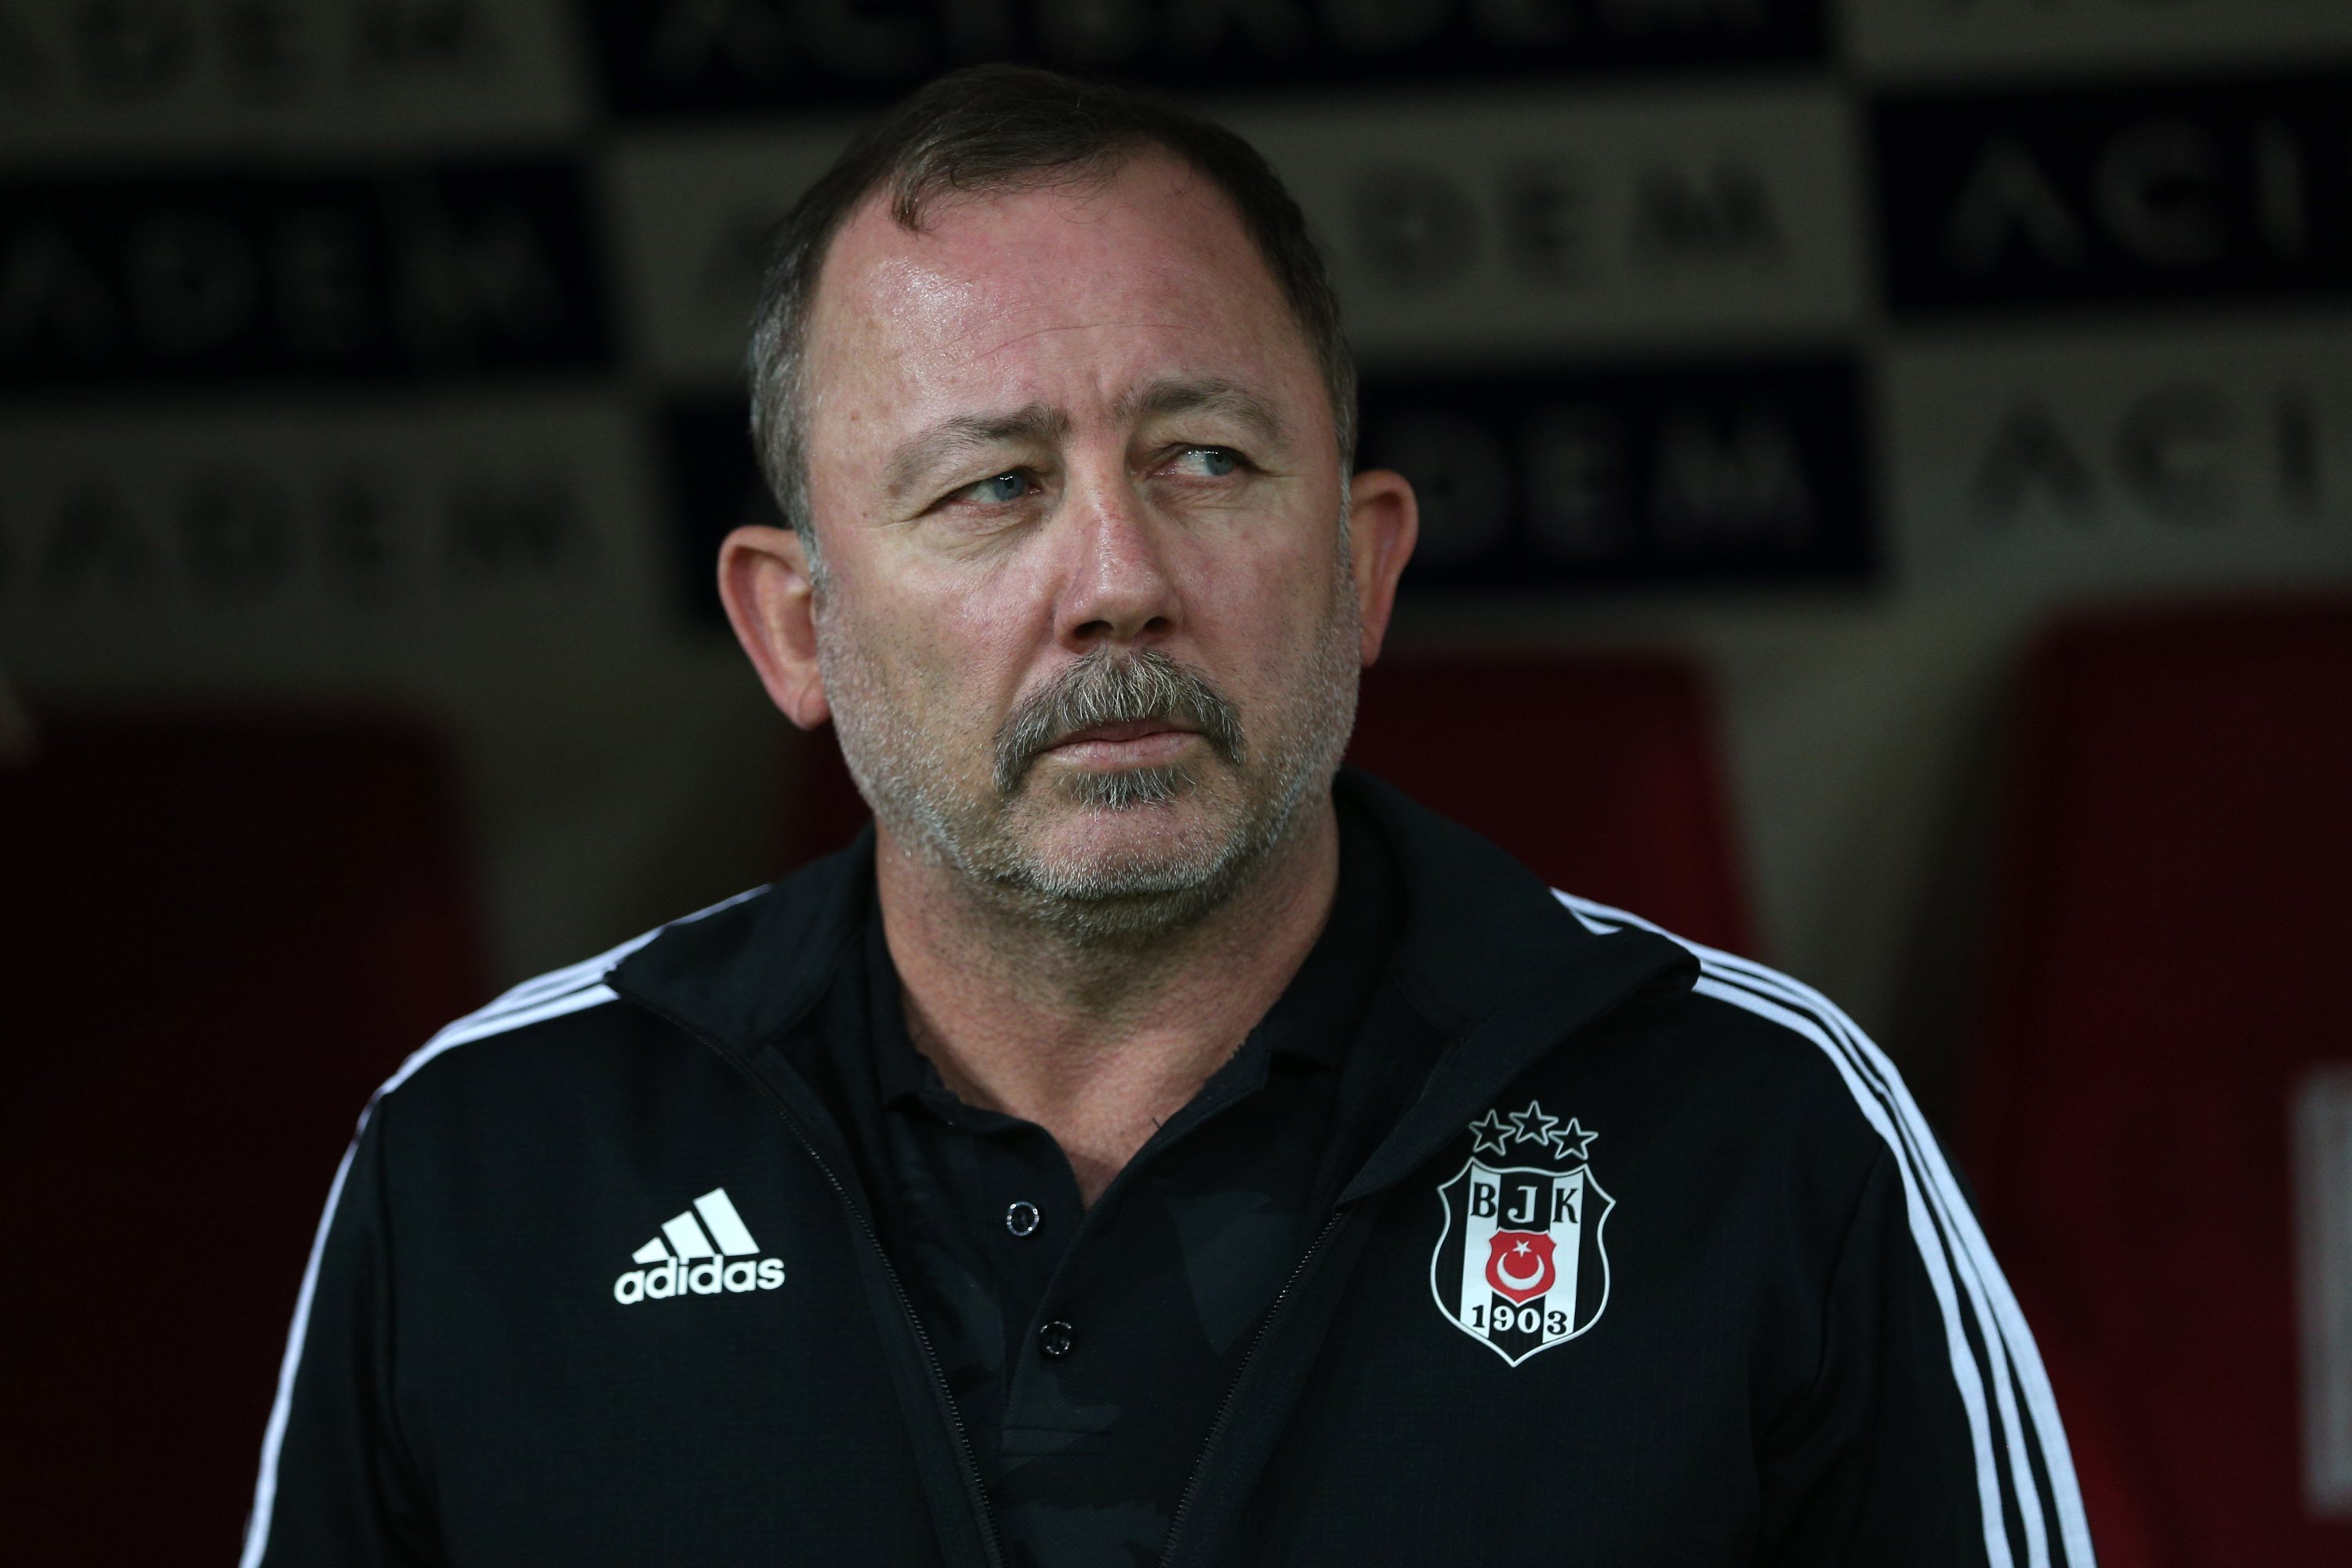 Just four months ago he was playing. Besiktas gets a new coach